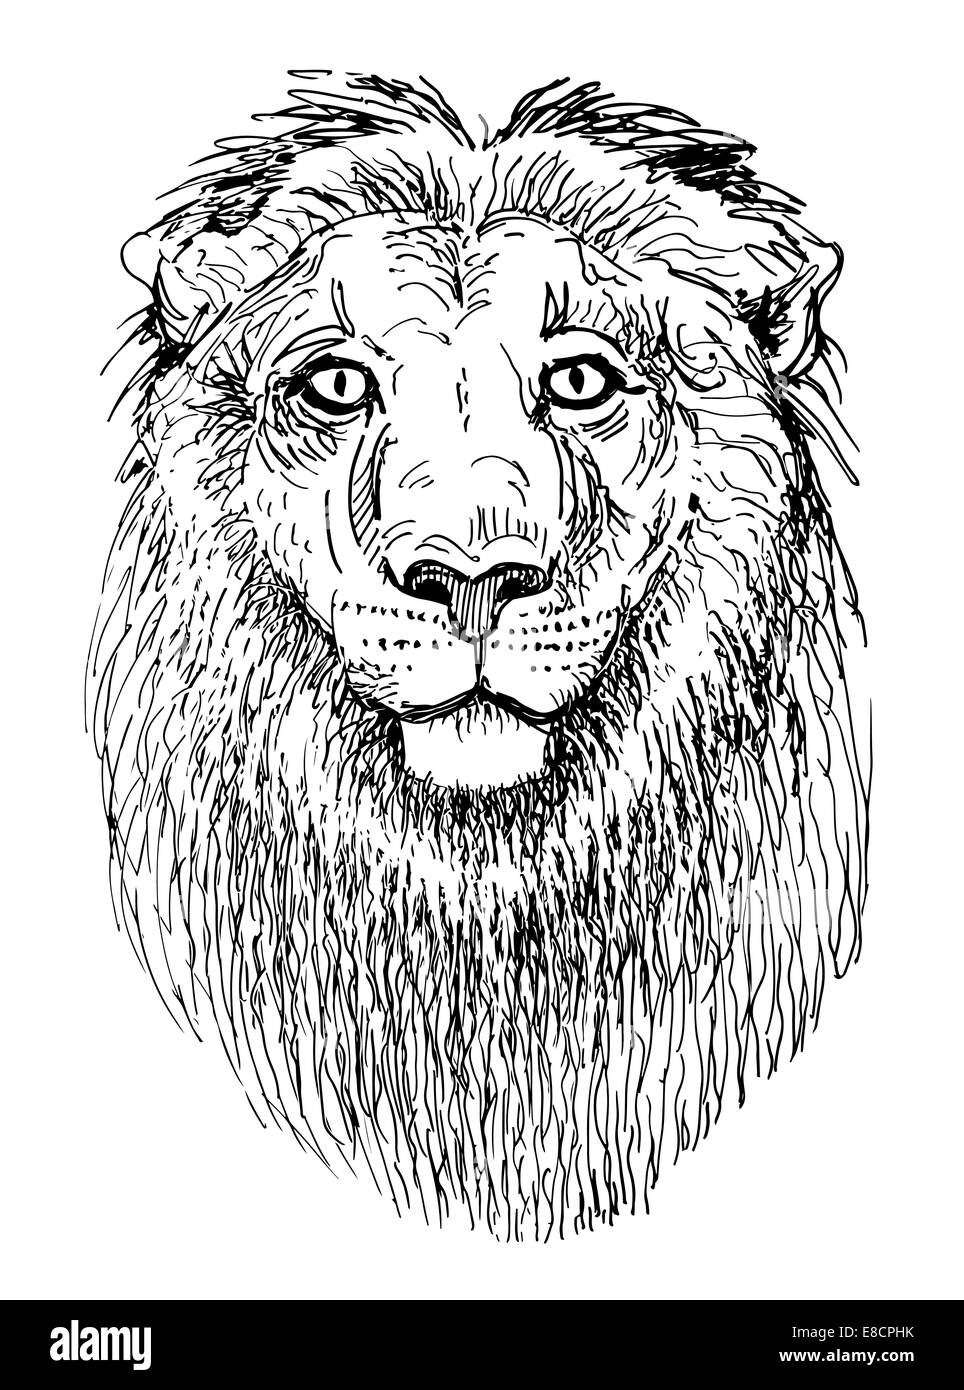 artwork lion, sketch black and white drawing of head animals Stock Photo